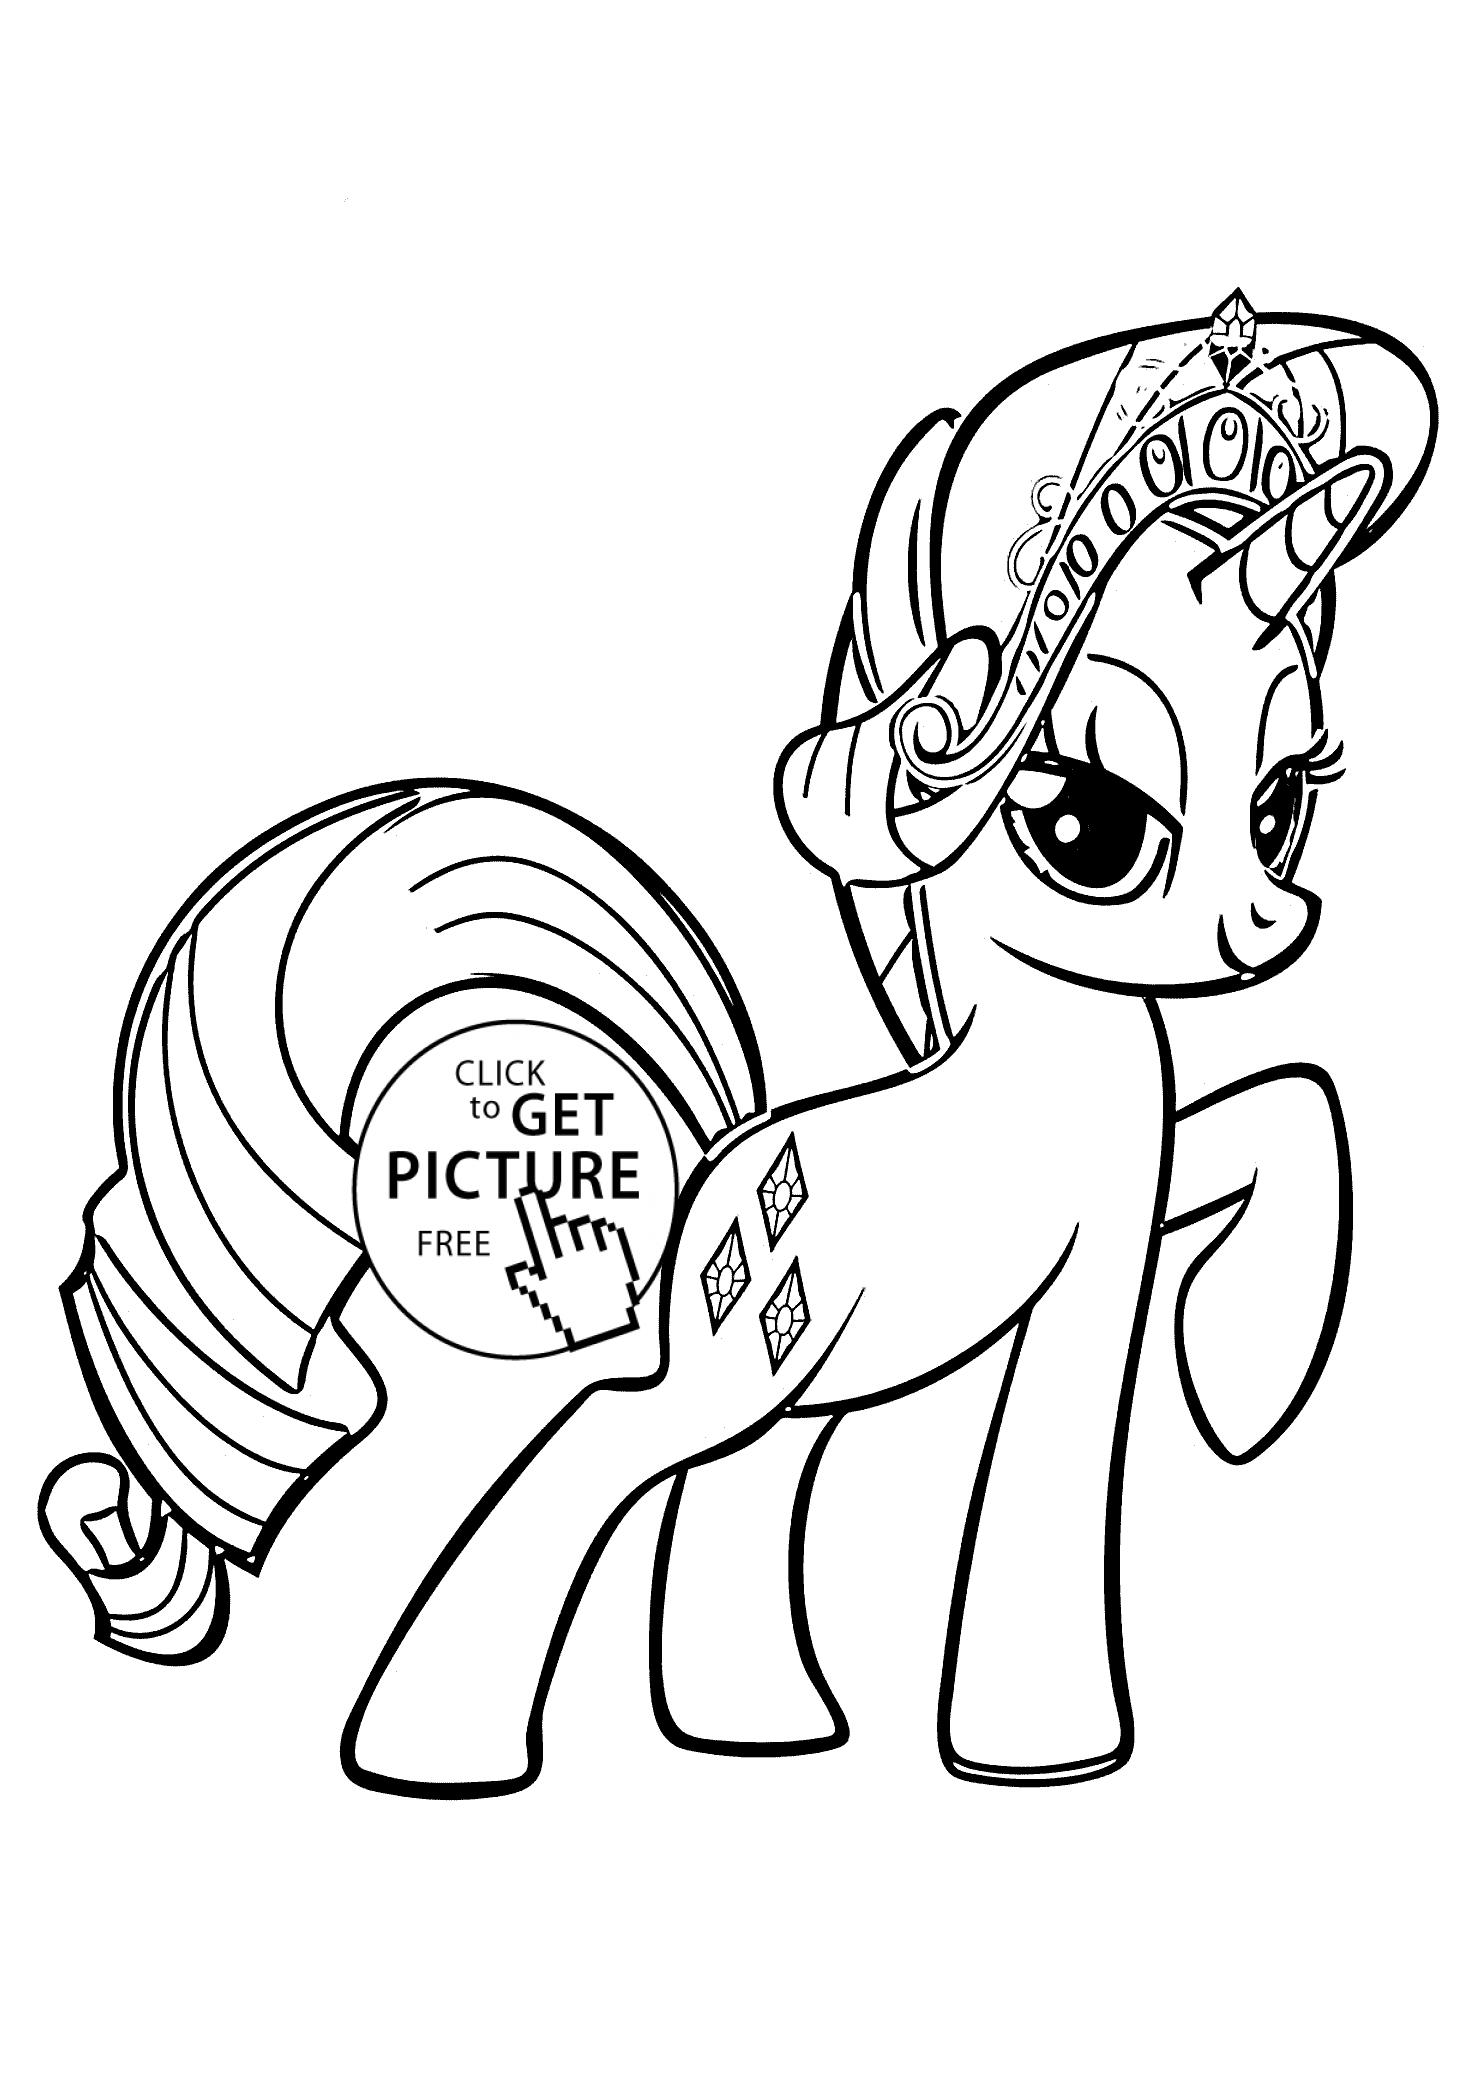 rarity coloring page rarity coloring pages best coloring pages for kids coloring page rarity 